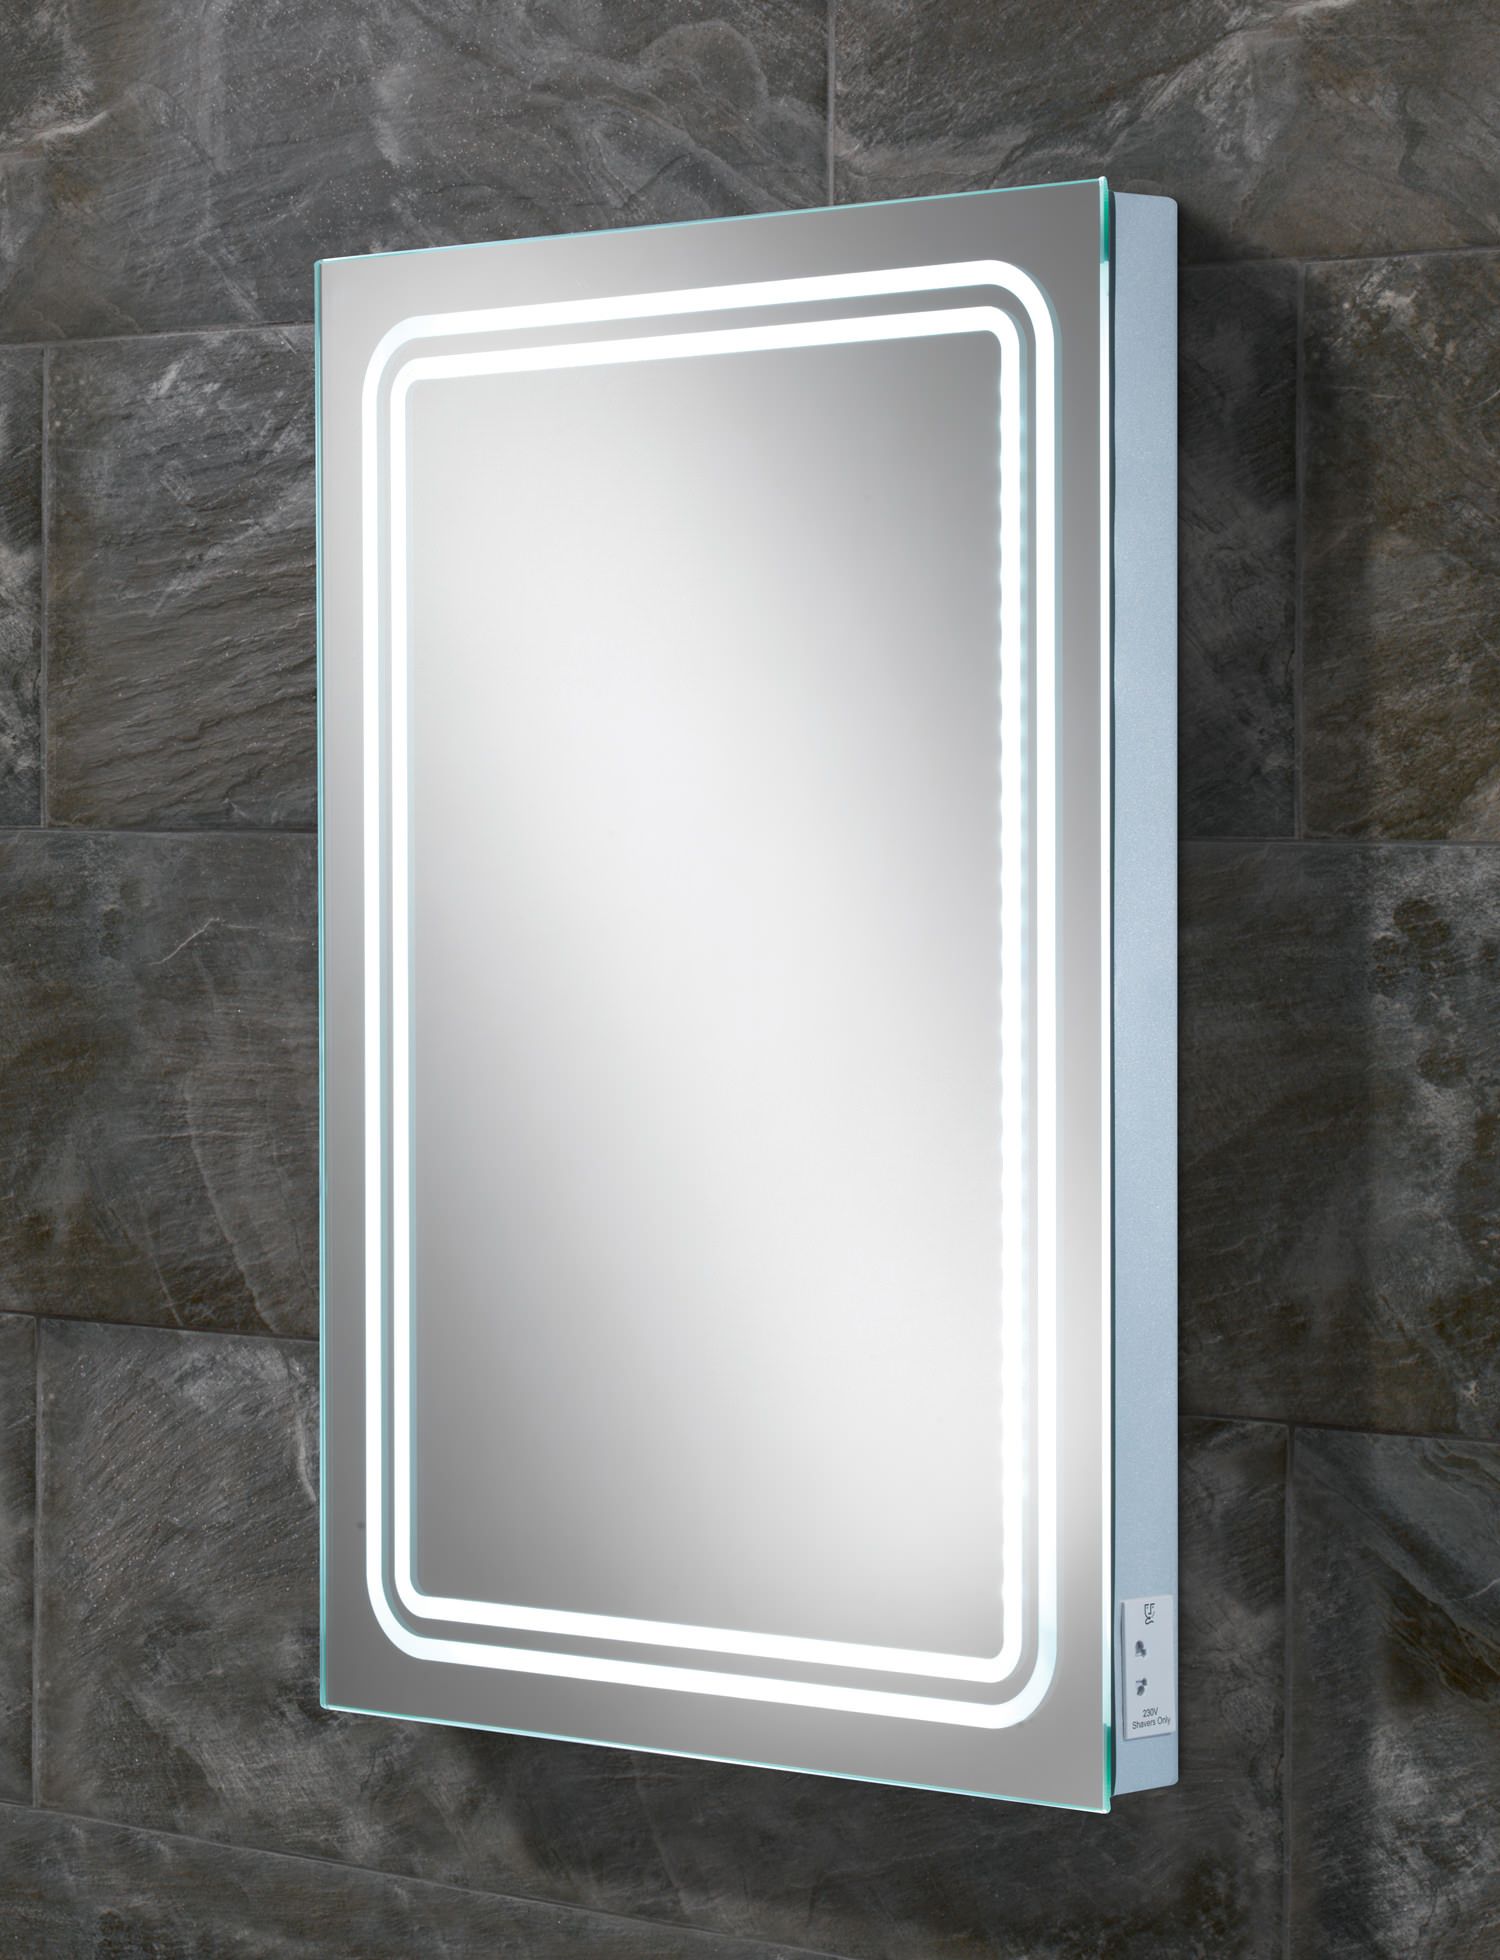 Hib Rotary Led Back Lit Mirror With Shaver Socket | 77416000 | 77416000 Intended For Back Lit Freestanding Led Floor Mirrors (View 15 of 15)